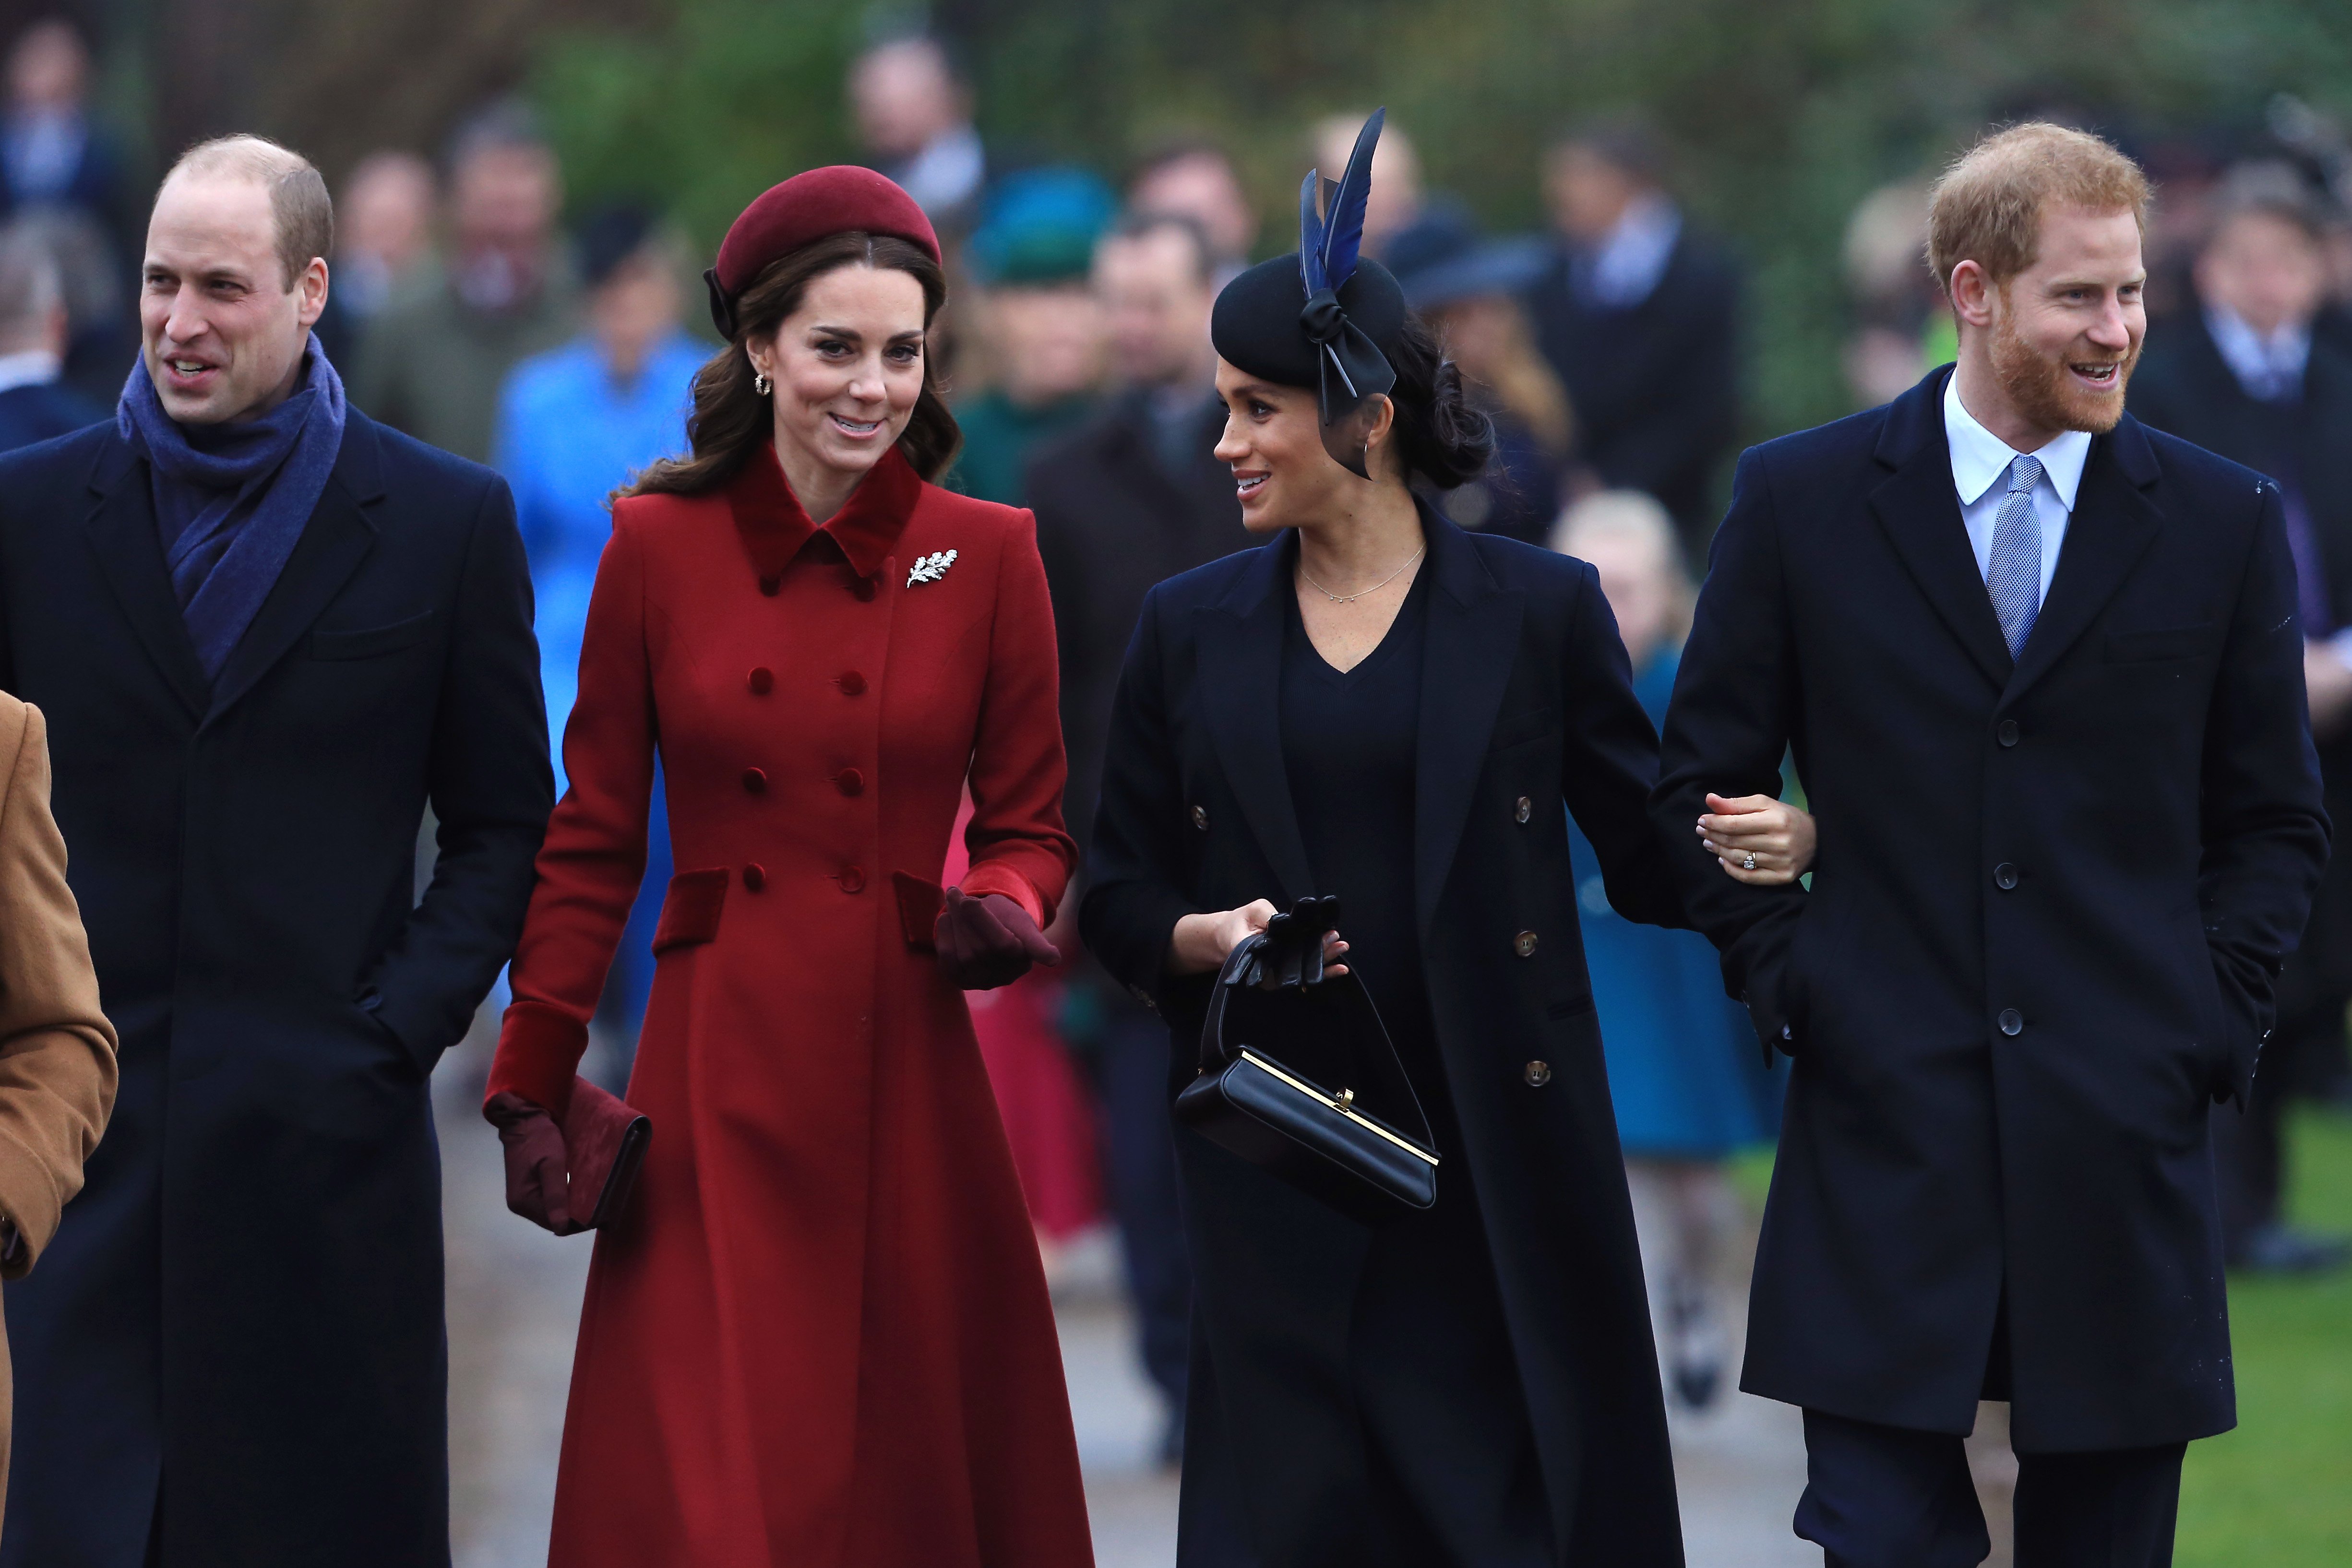 Prince William, Duke of Cambridge, Catherine, Duchess of Cambridge, Meghan, Duchess of Sussex and Prince Harry, Duke of Sussex pictured arriving to attend Christmas Day Church service at Church of St Mary Magdalene on the Sandringham estate on December 25, 2018 in King's Lynn, England. | Source: Getty Images